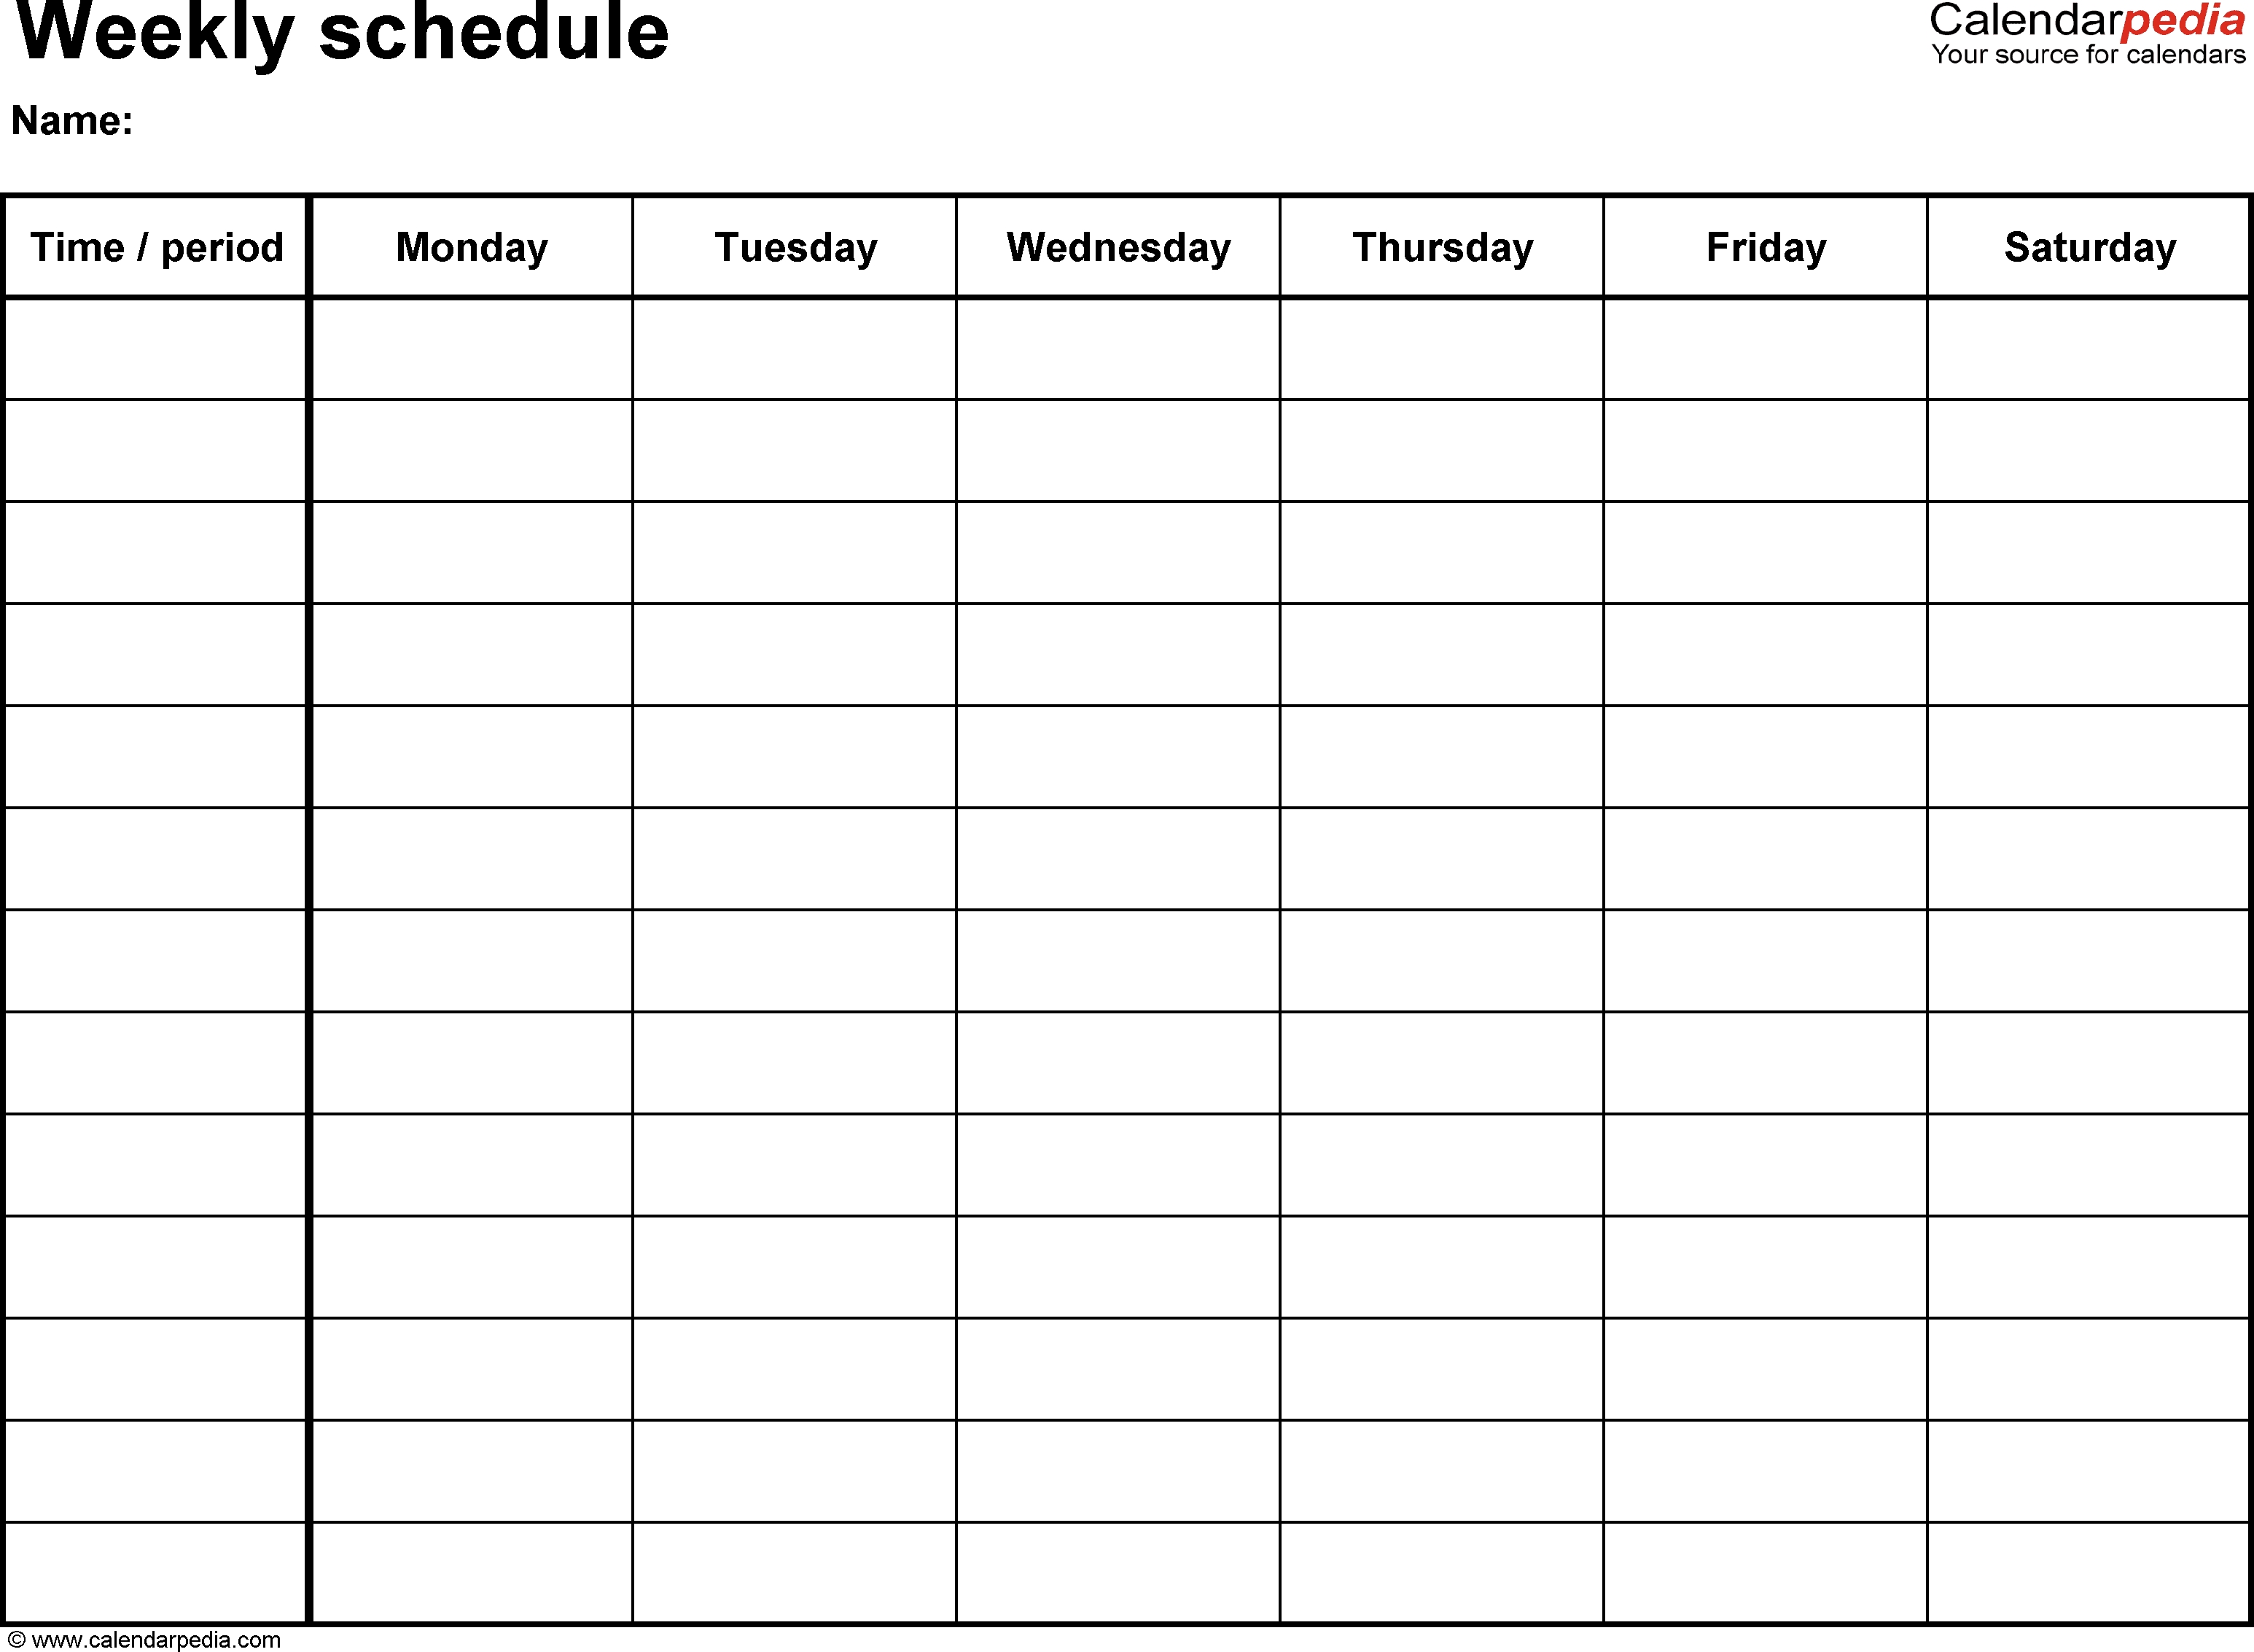 Free Weekly Schedule Templates For Word - 18 Templates-Monday To Friday Monthly Calendar Template